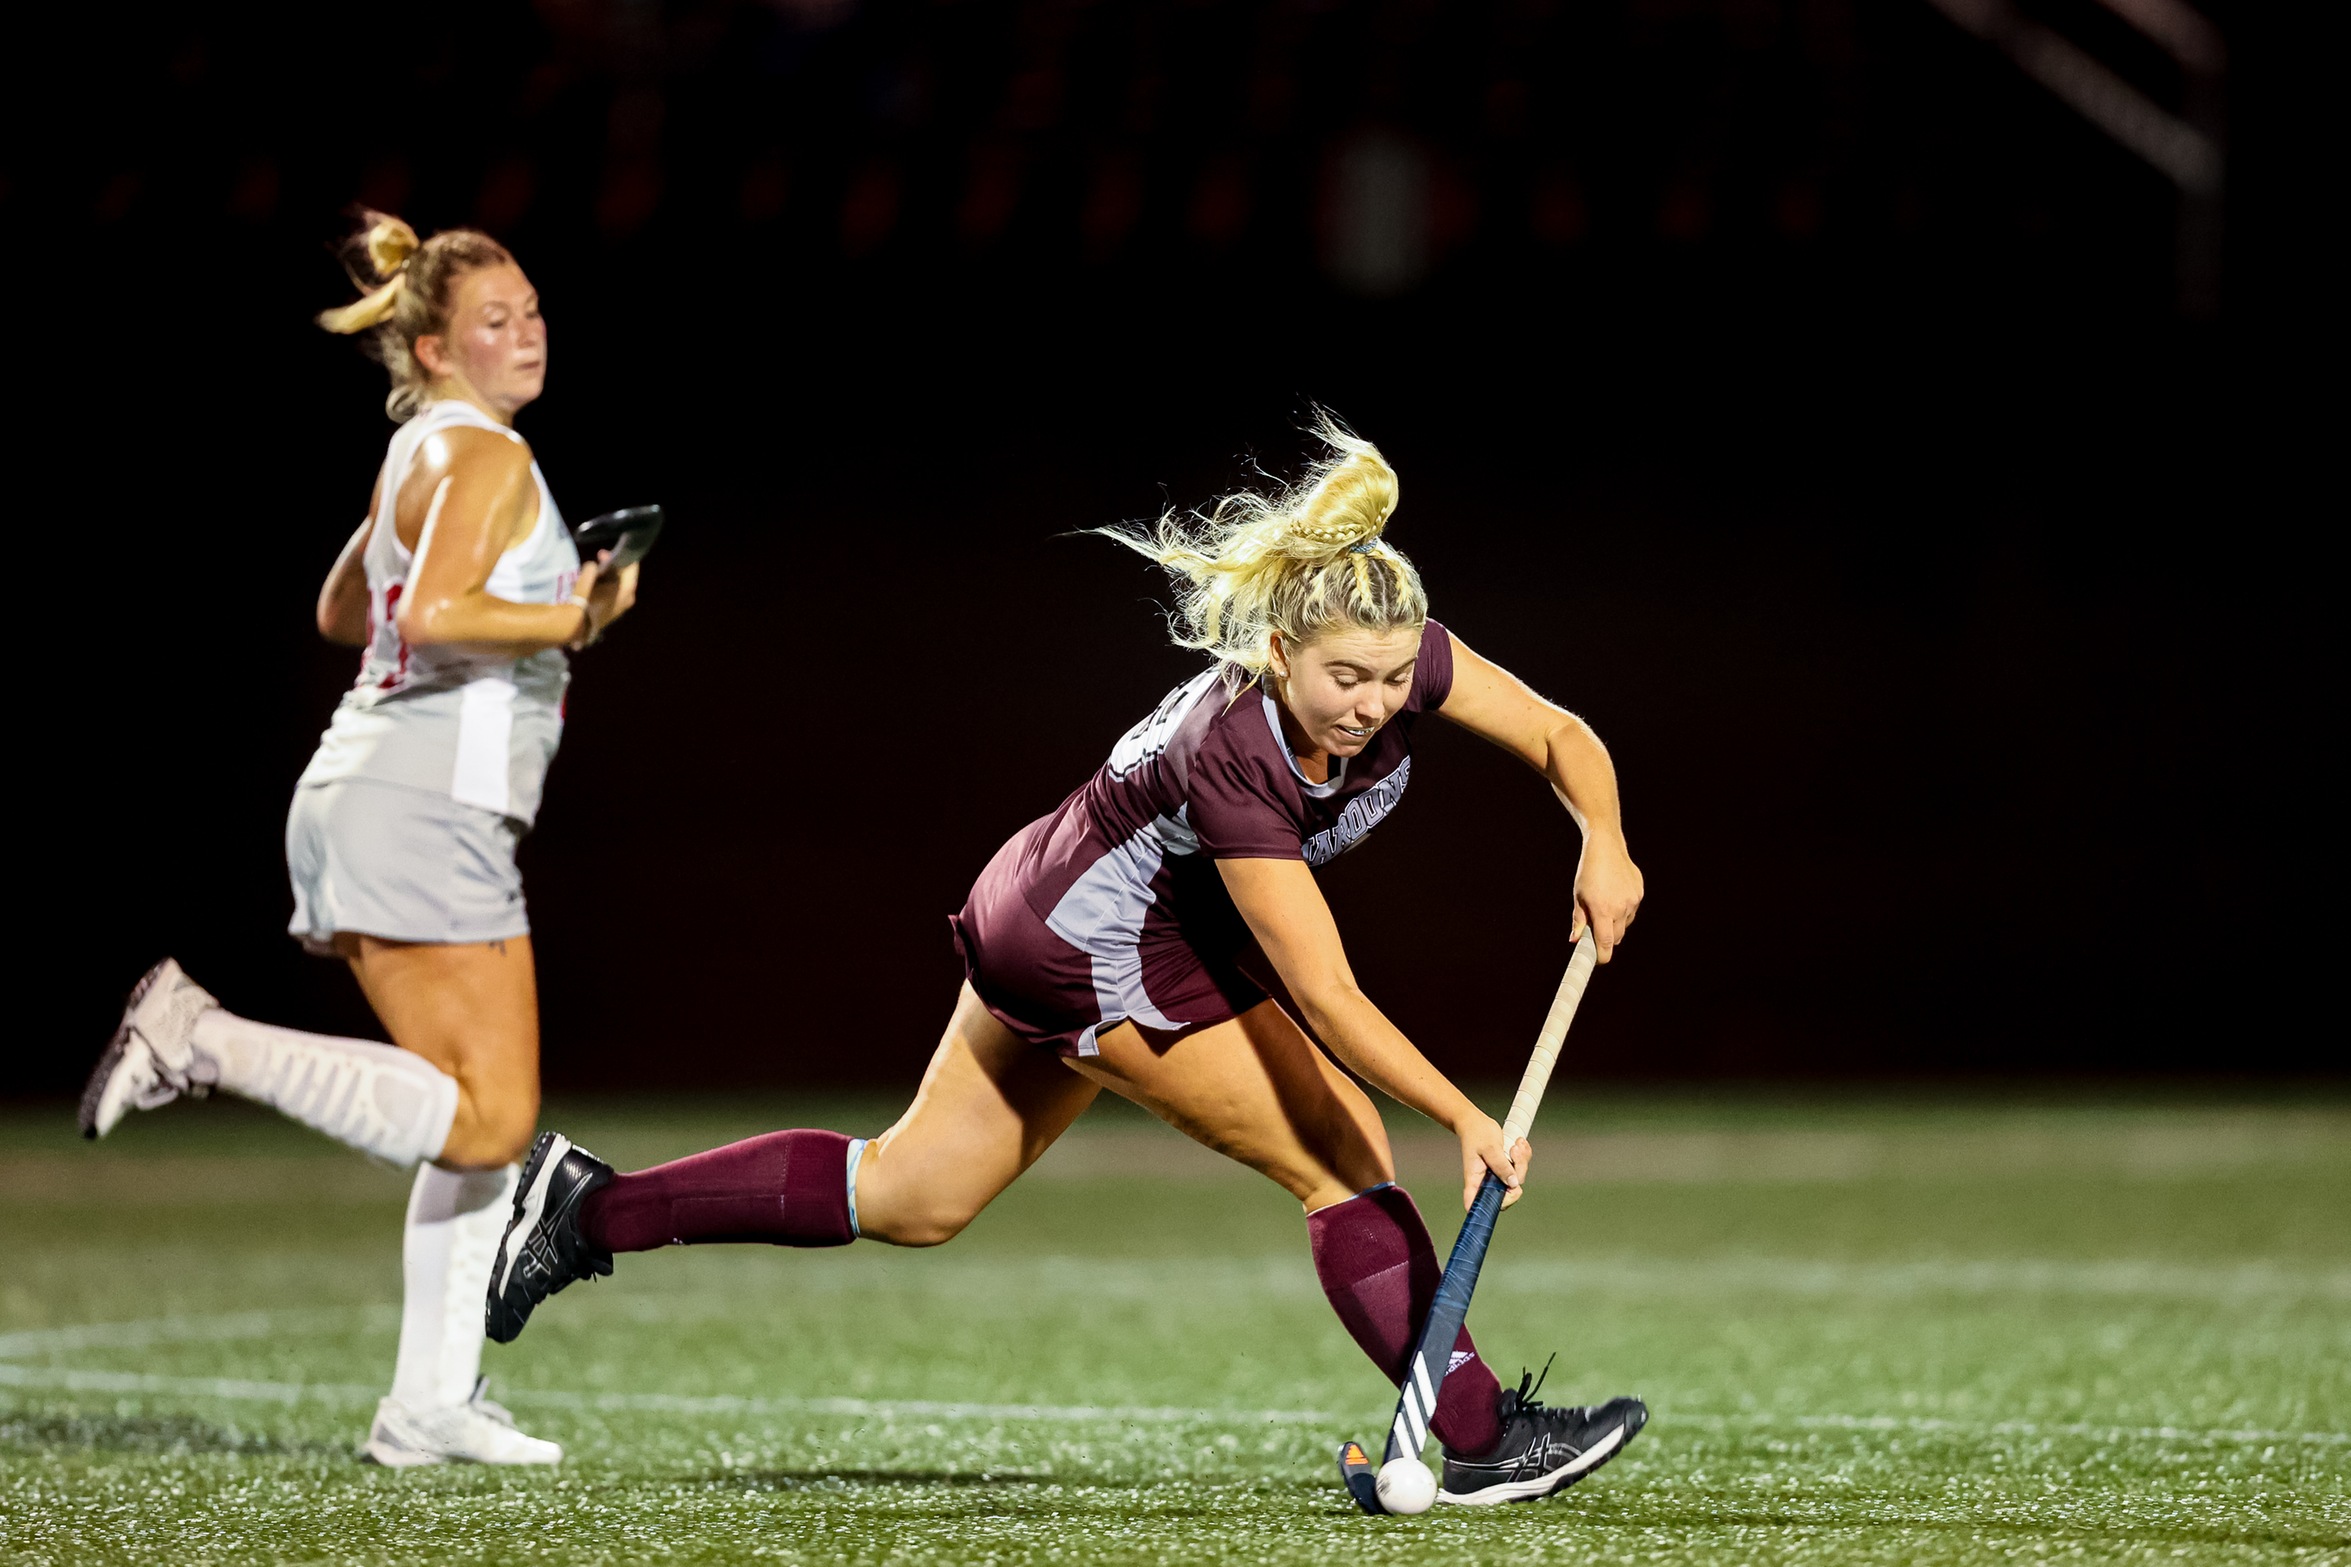 Maroons Shutout Southern Virginia on the Road, 5-0